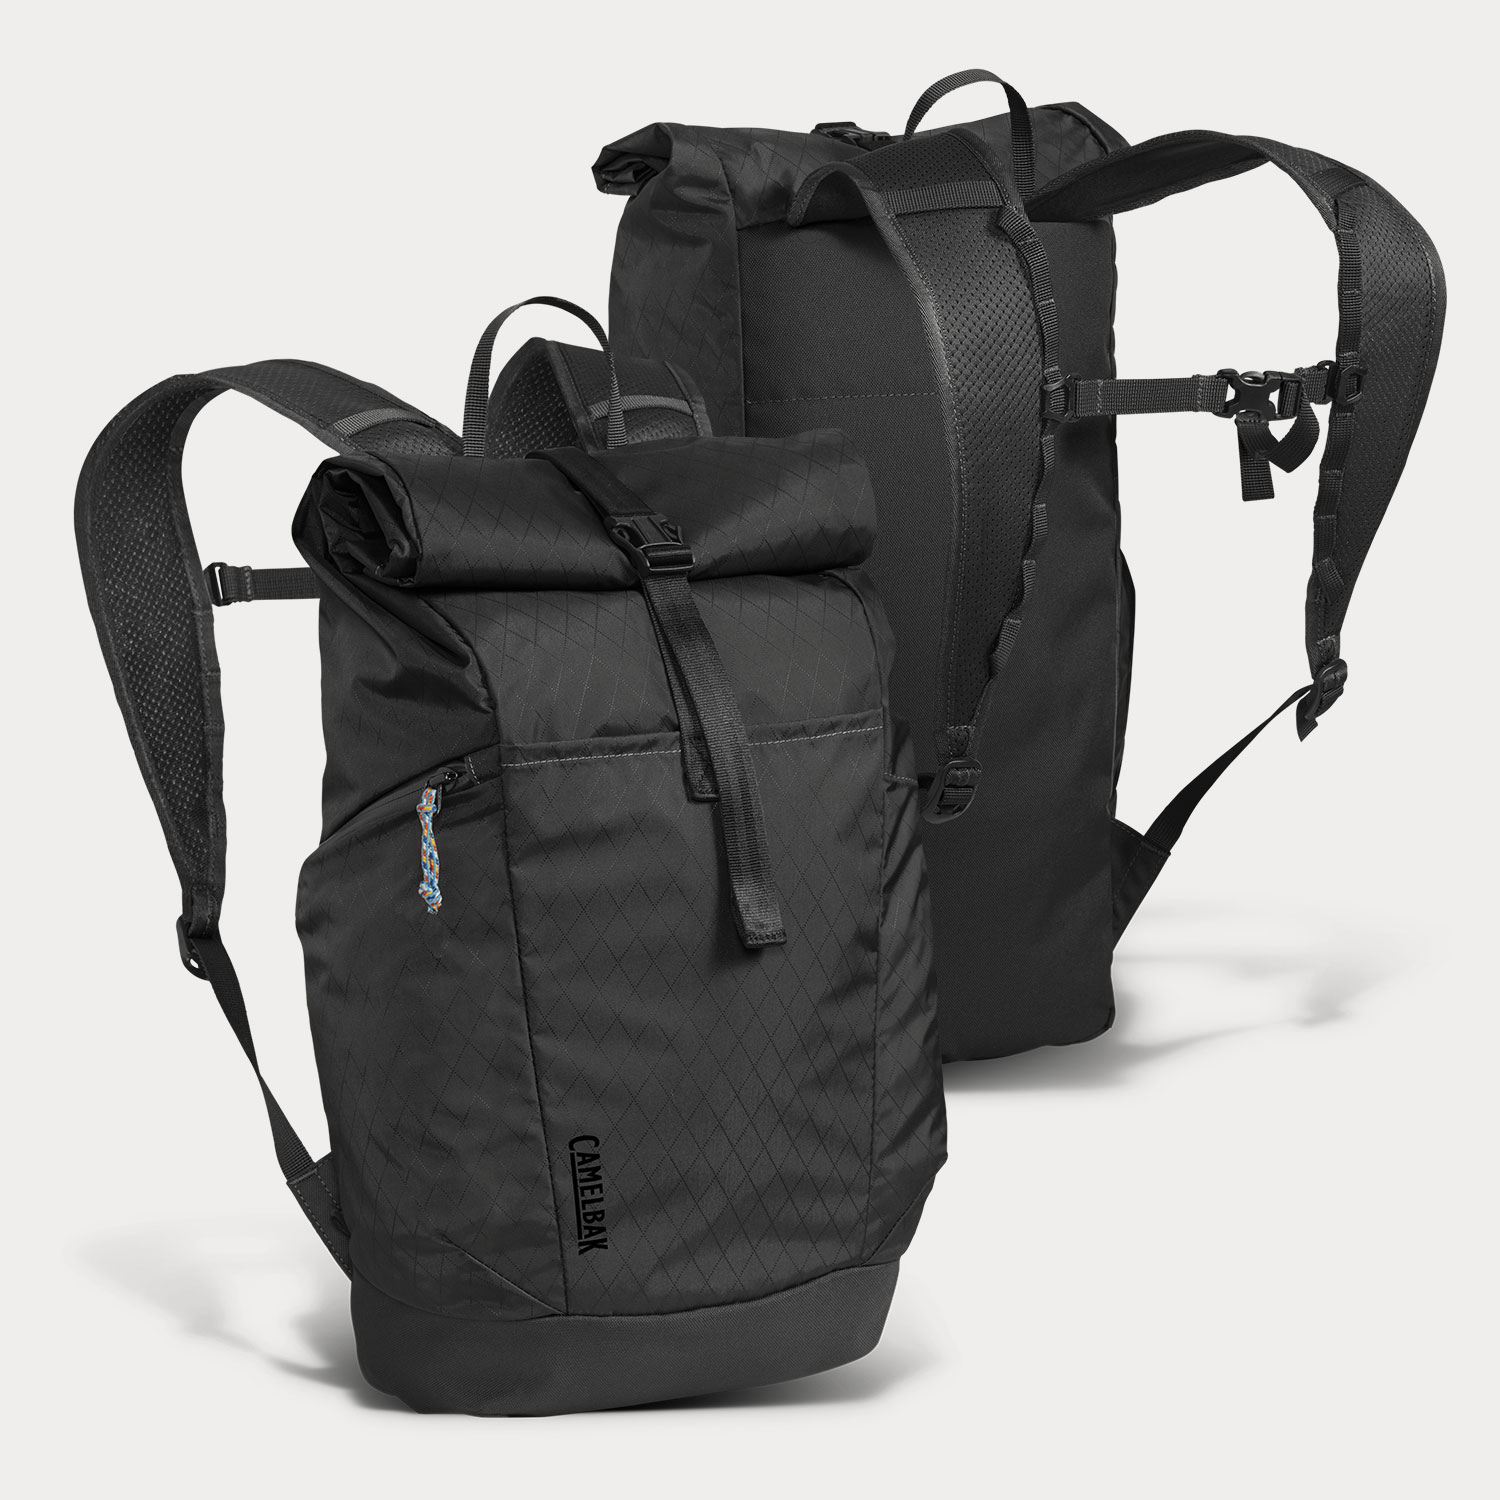 Top Roll Top Backpack | stickhealthcare.co.uk